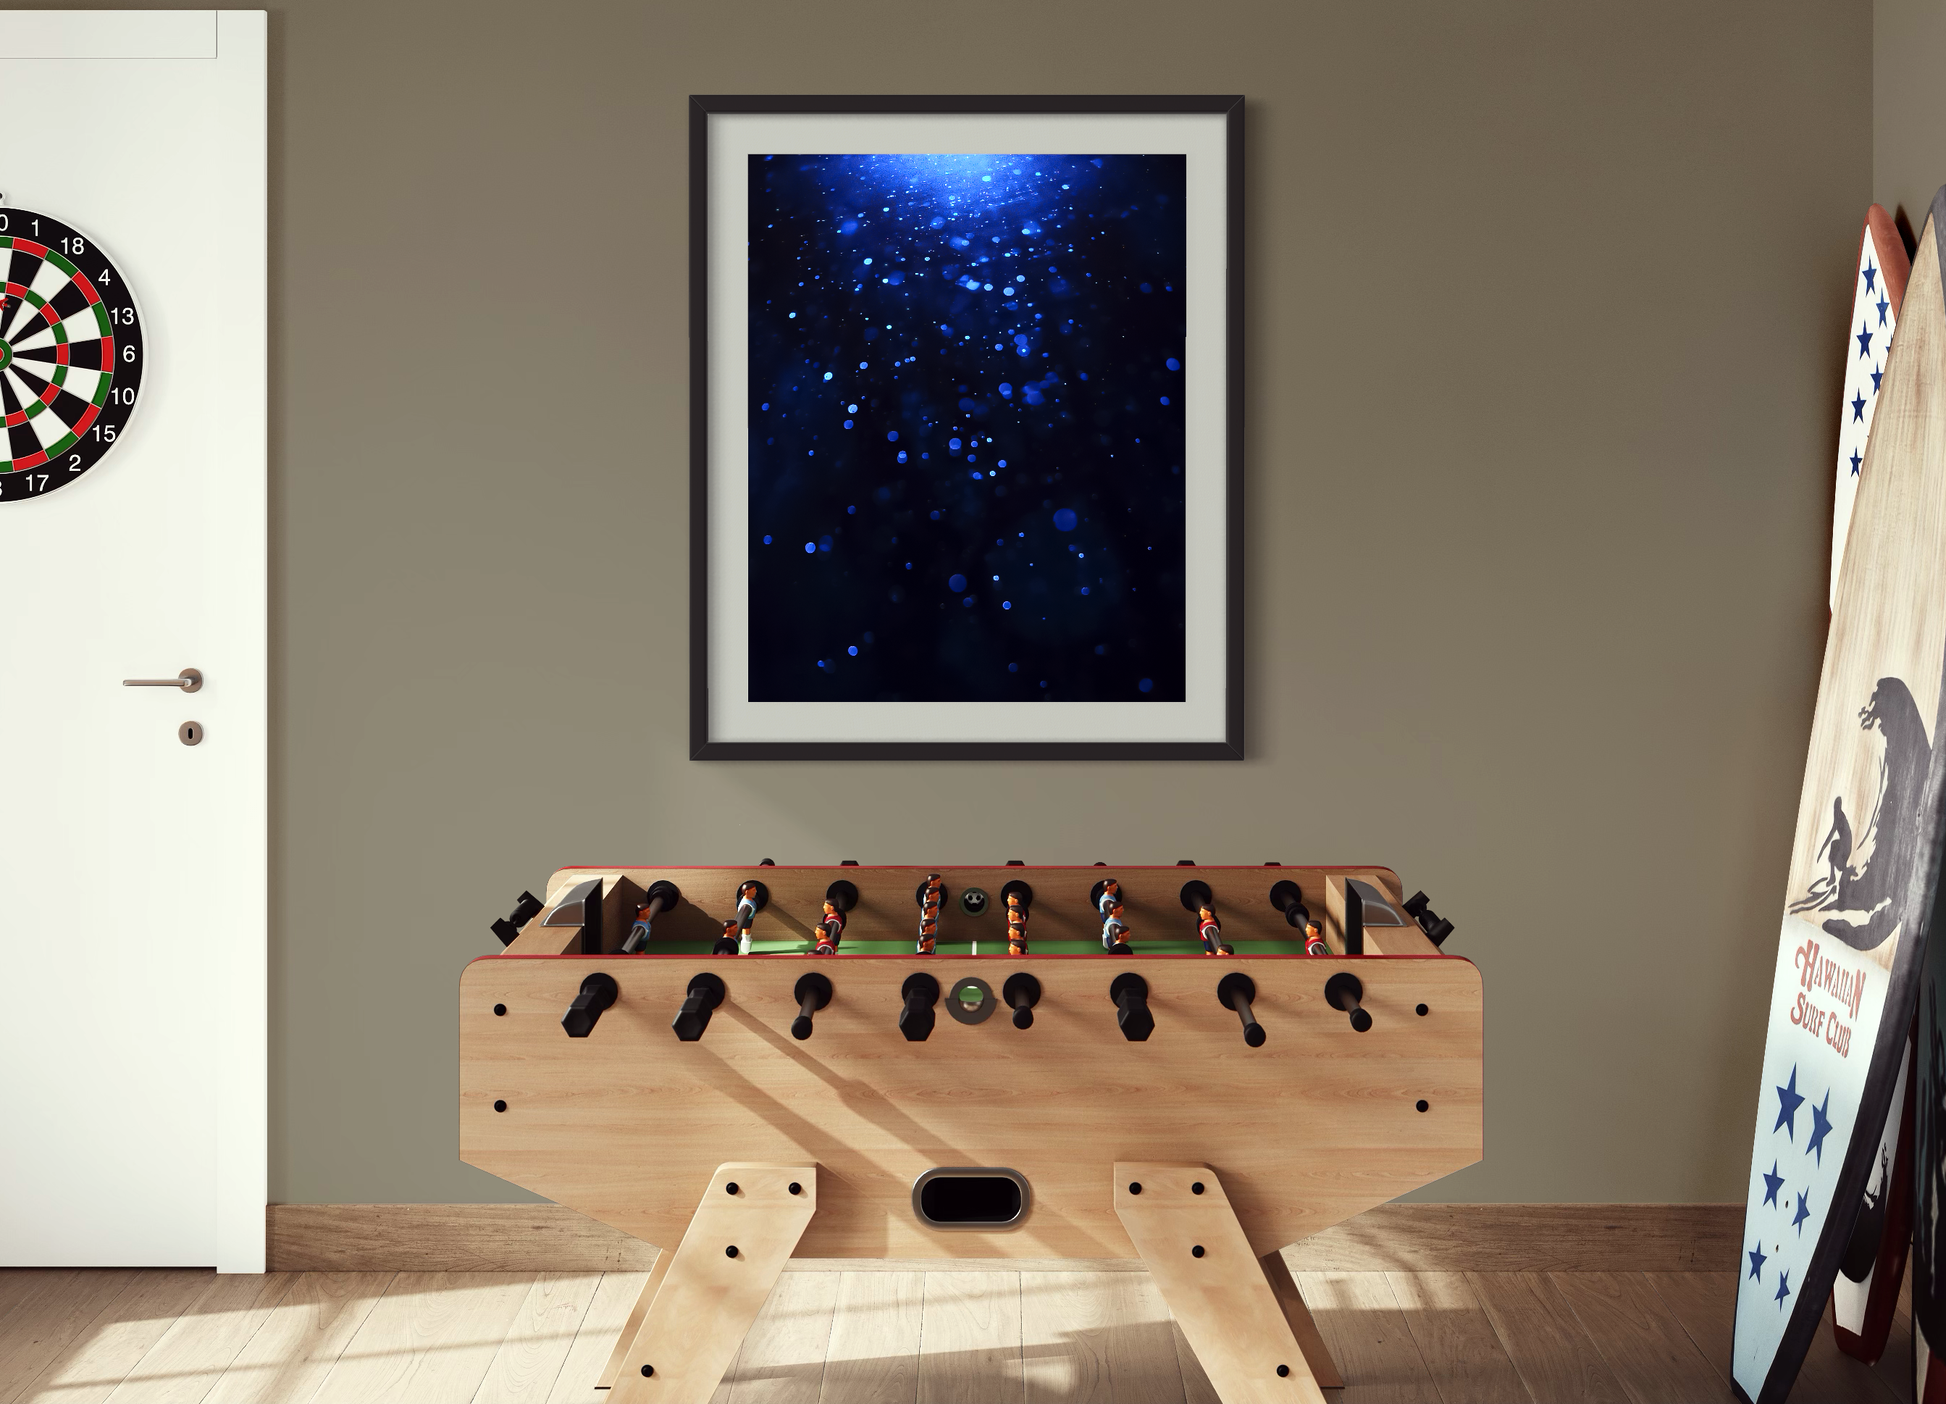 sci fi space looking photo as if close to the exterior of a space ship, blue tone in black frame in game room with foosball table, dart board and surf boards